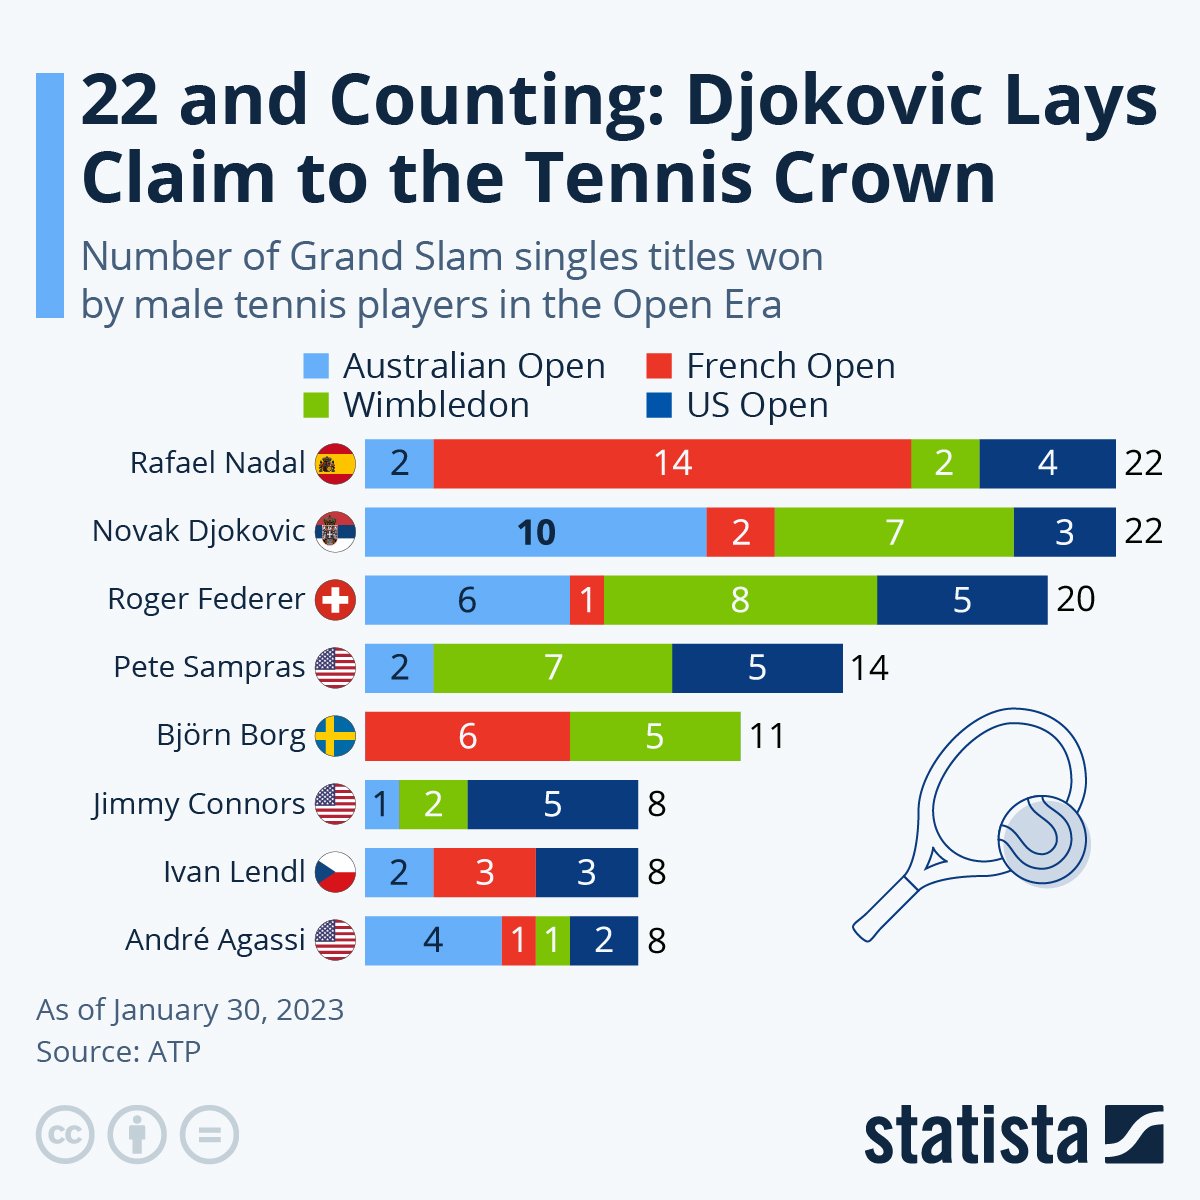 @AzabShaker I really don't know why everyone claims that Alcaraz is so good in the best of 5? 🤔

In fact, his Grand Slam record is pretty poor: 

2 QF (USO 2021 and RG 2022) 
1 win (USO 2022), where he did almost lost to Sinner in QF and not face Djokovic, Nadal, Medvedev, Zverev...